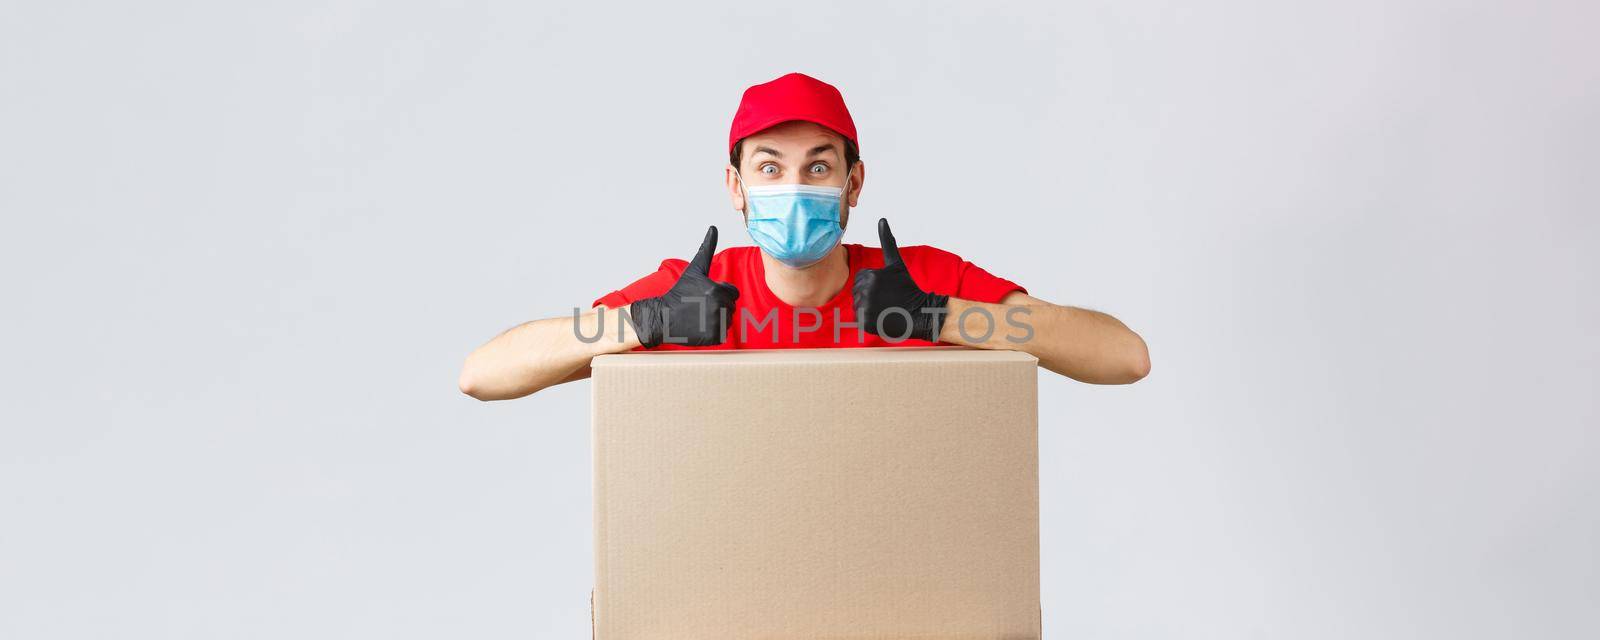 Packages and parcels delivery, covid-19 quarantine and transfer orders. Enthusiastic courier in red uniform, face mask and gloves, lean on box order and thumb-up, recommend service, express shipping.